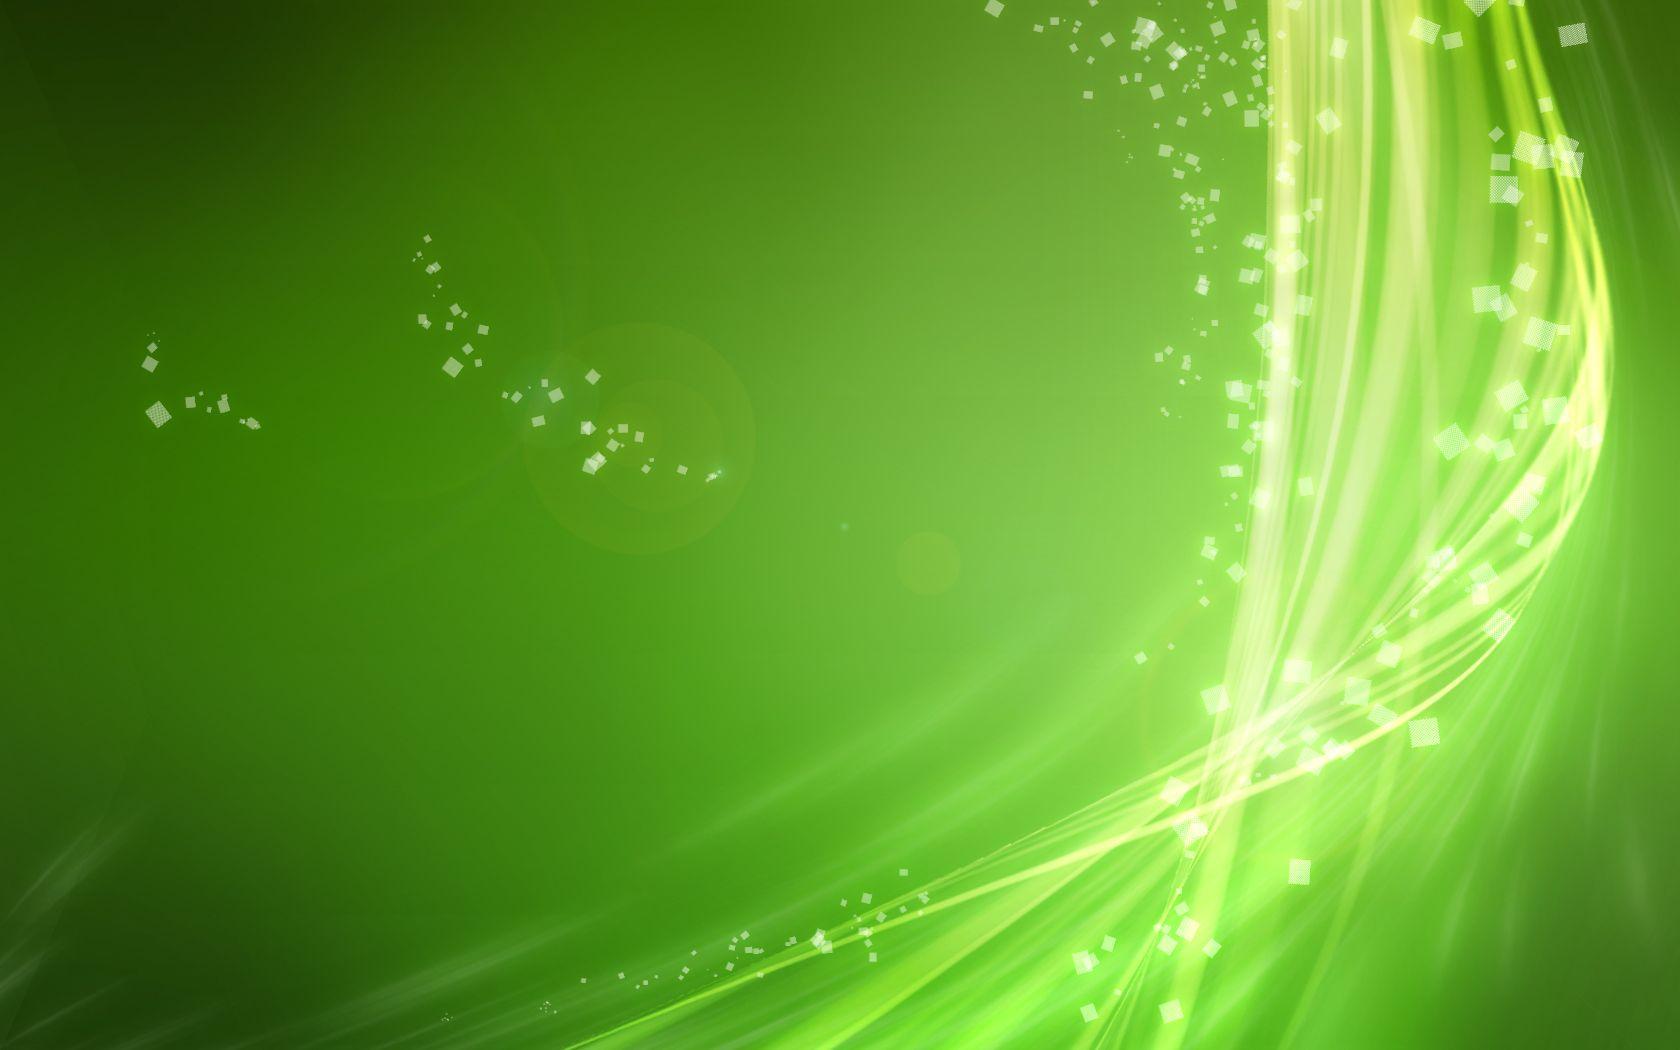 Green Abstract Wallpaper: Find best latest Green Abstract